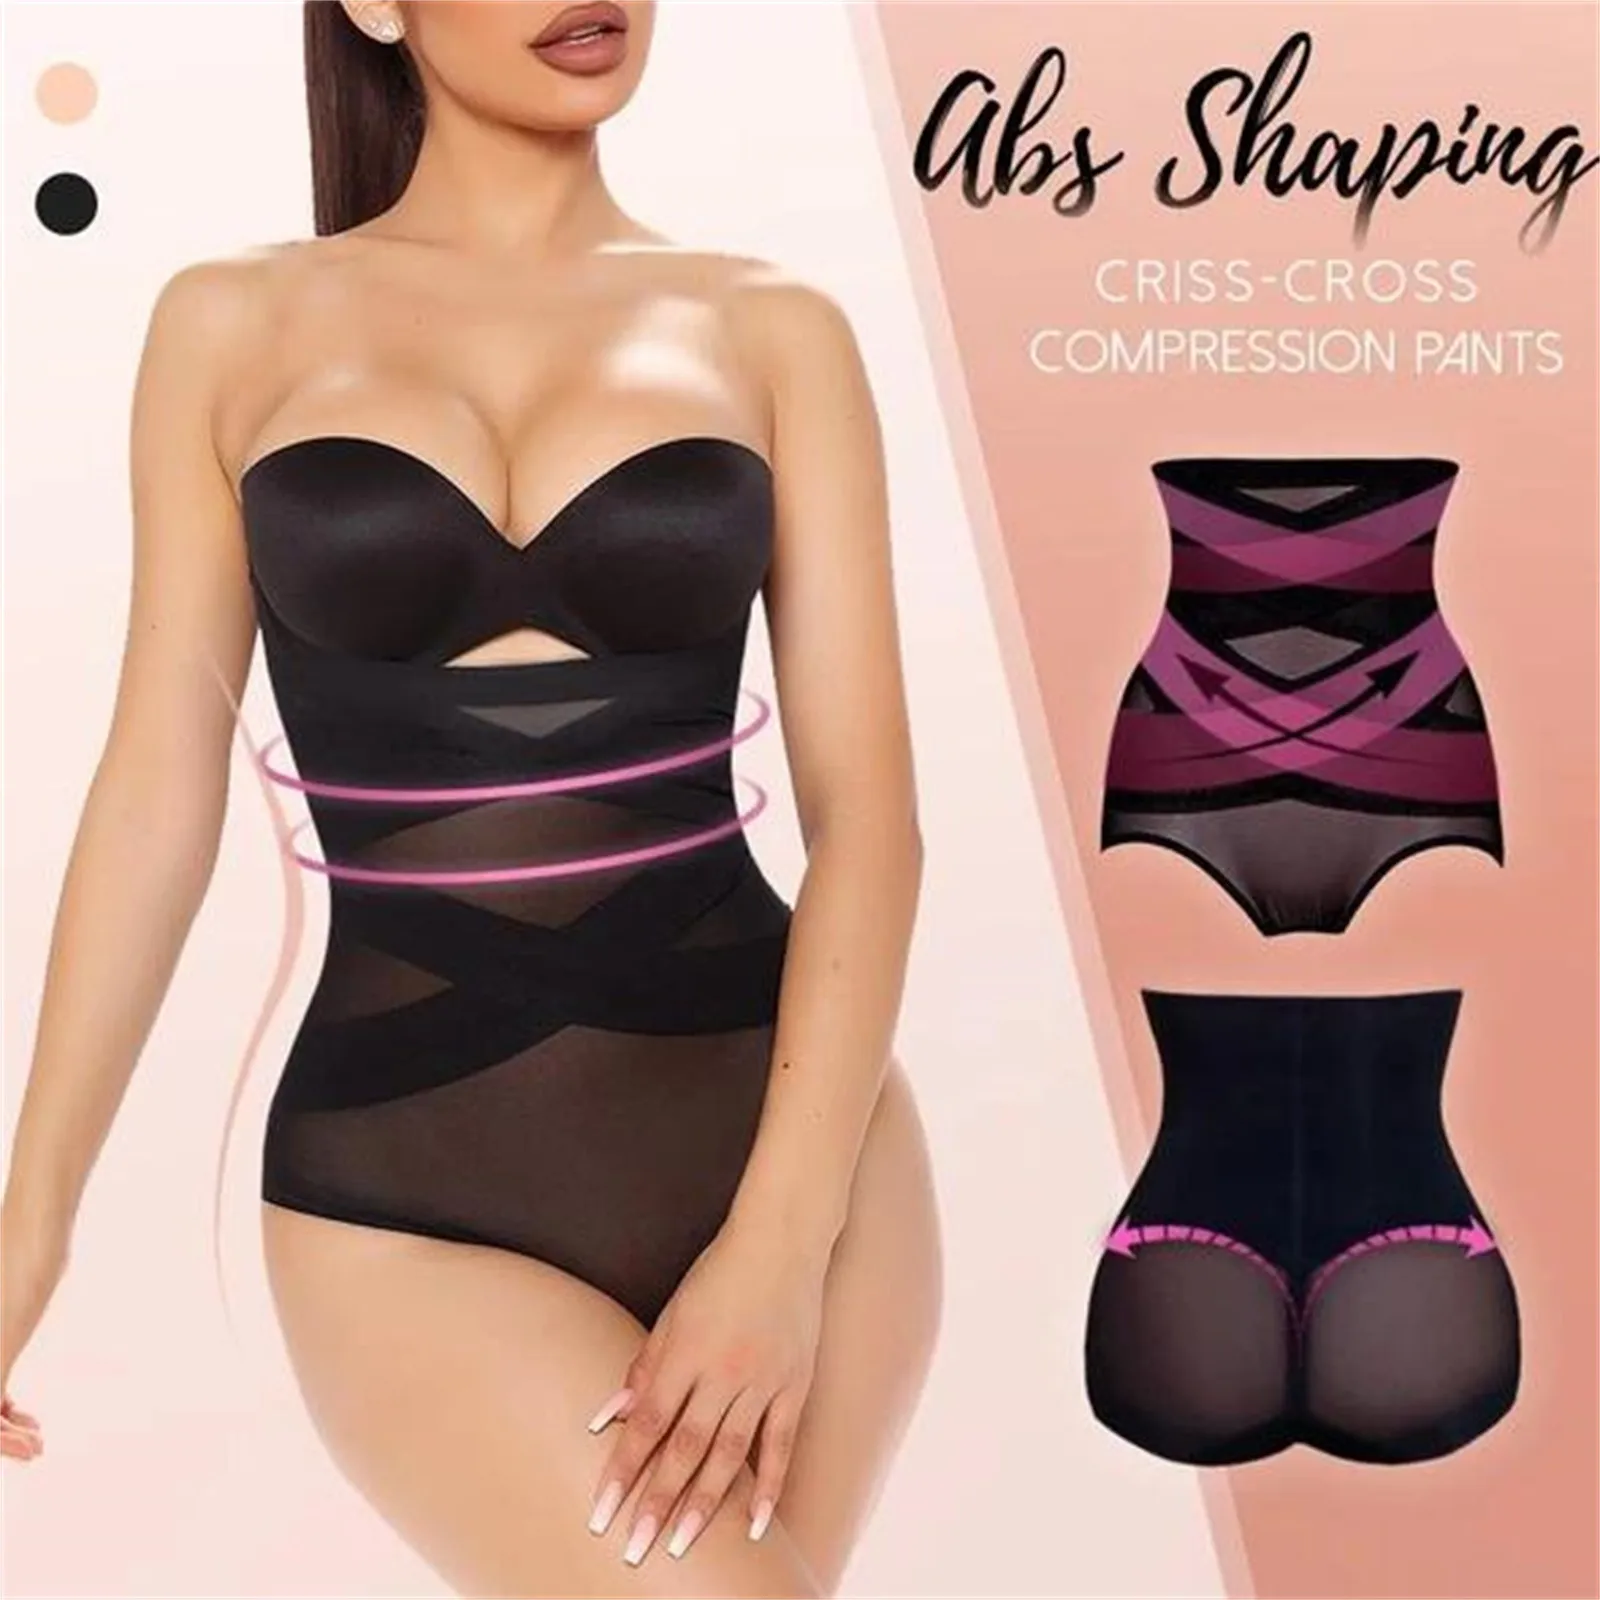 leonisa shapewear Beauty Slim Cross Cover Cellulite Fork Compression Abs Shaping Pants Сексуальное Нижее Белье Underwear For Sex Lenceria Shapers shapewear bodysuit